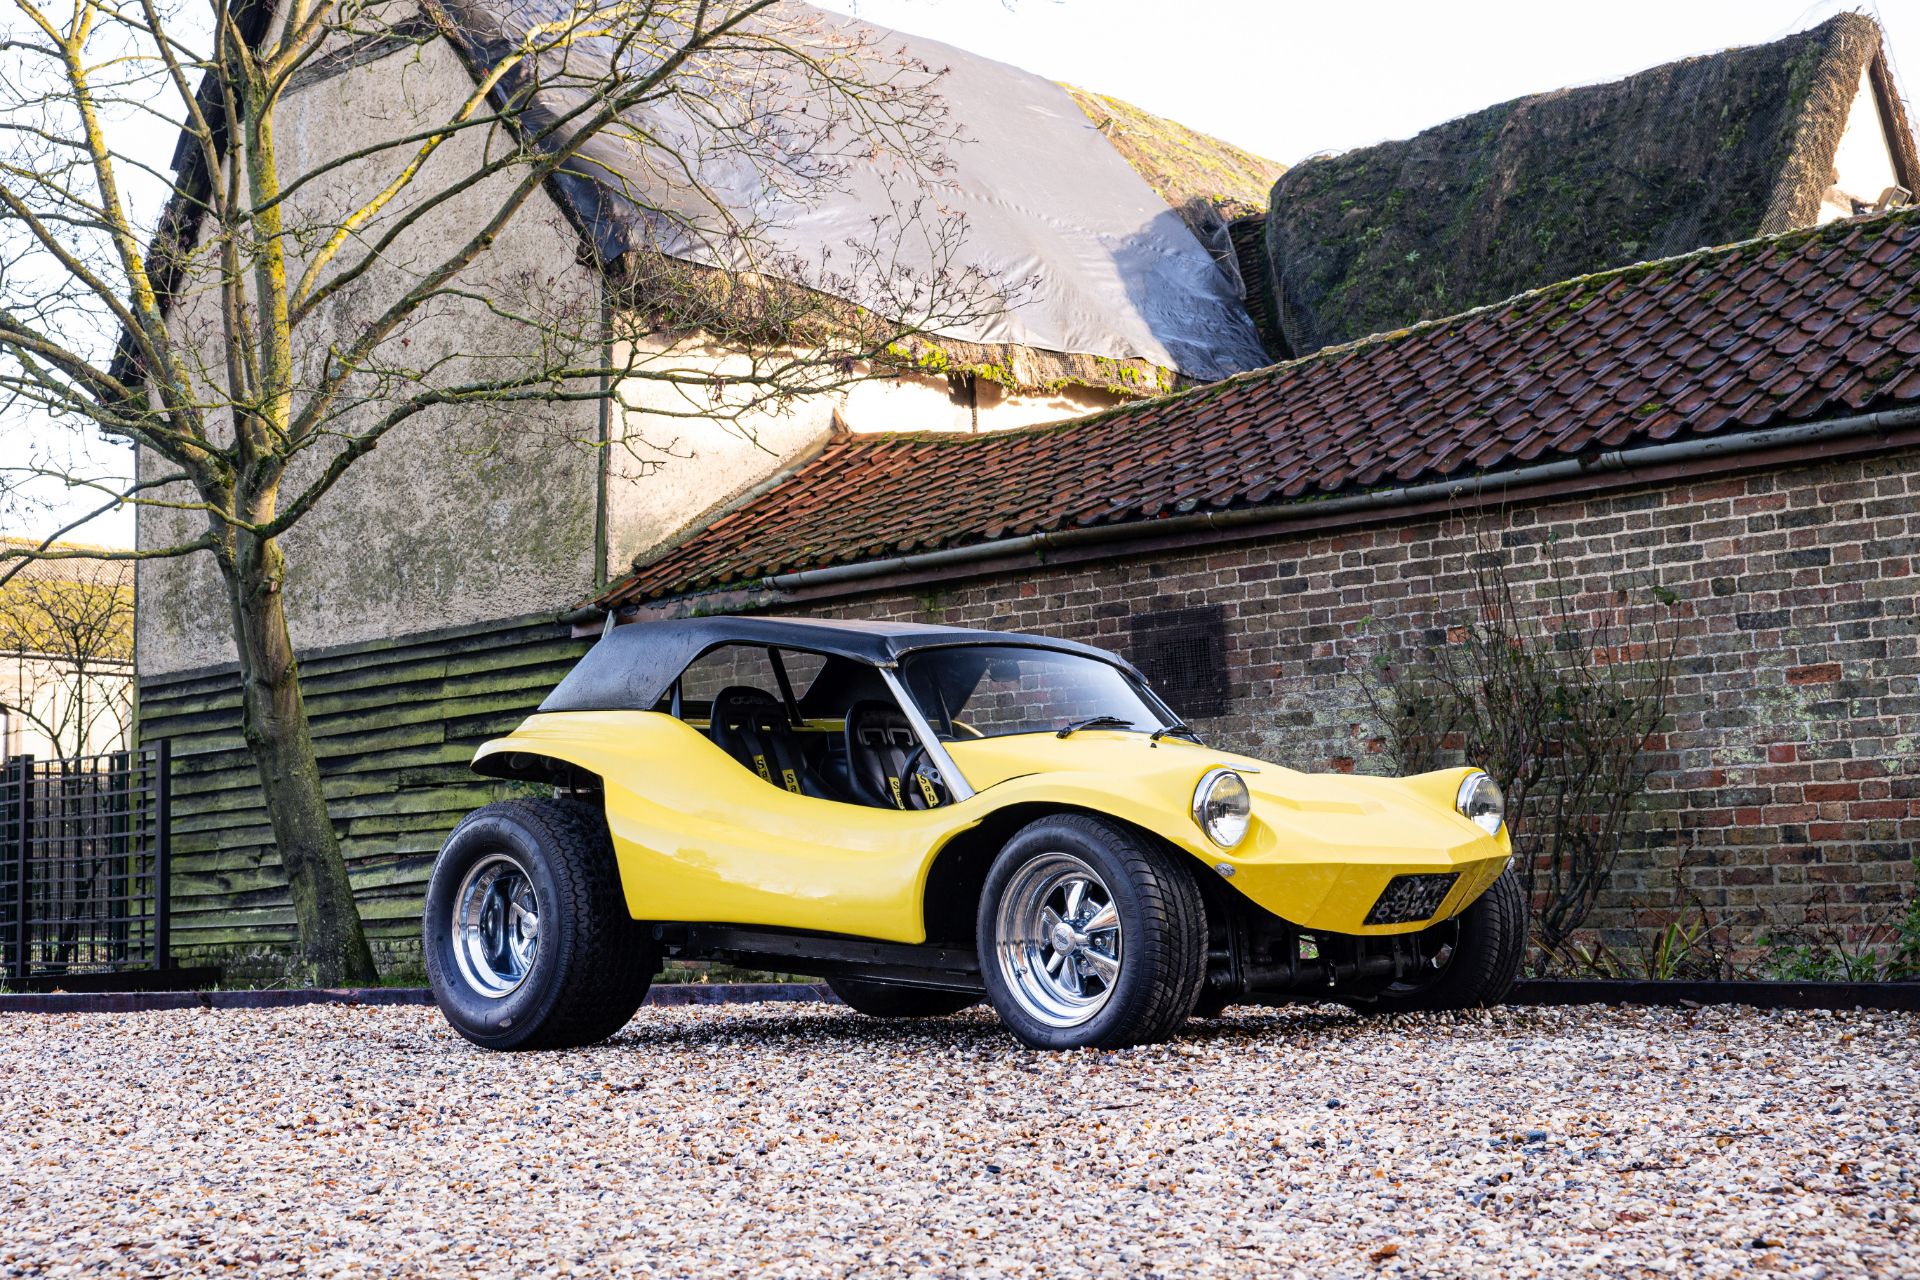 The Property of a Gentleman and Racing Enthusiast,1970 Volkswagen Dune Buggy Replica Chassis no....